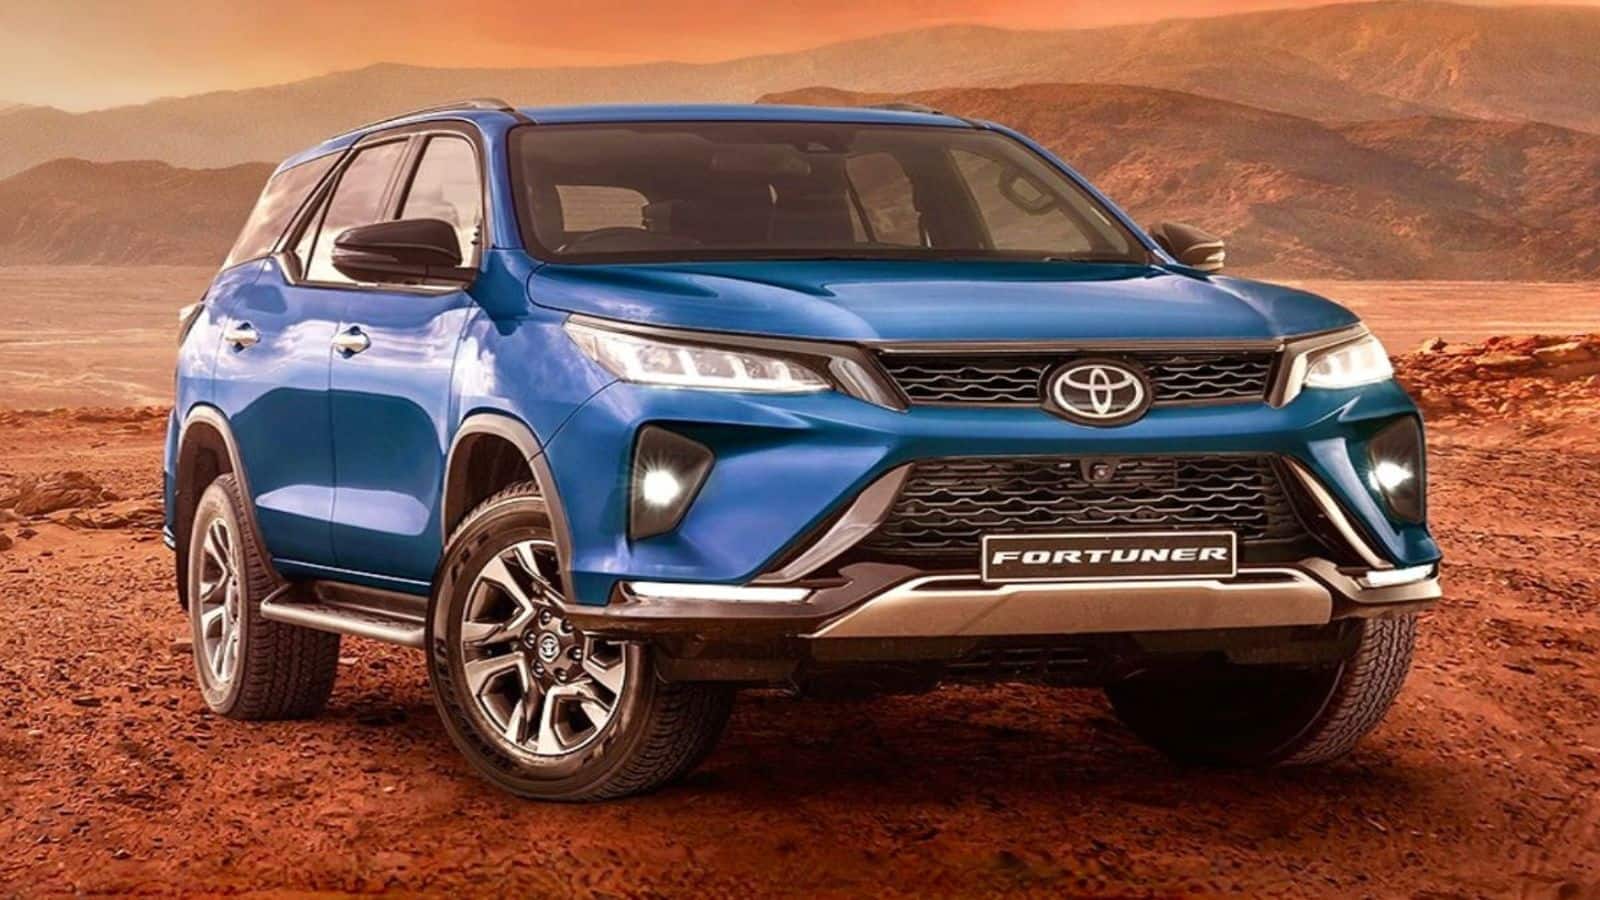 Toyota launches new Fortuner SUV with hybrid tech